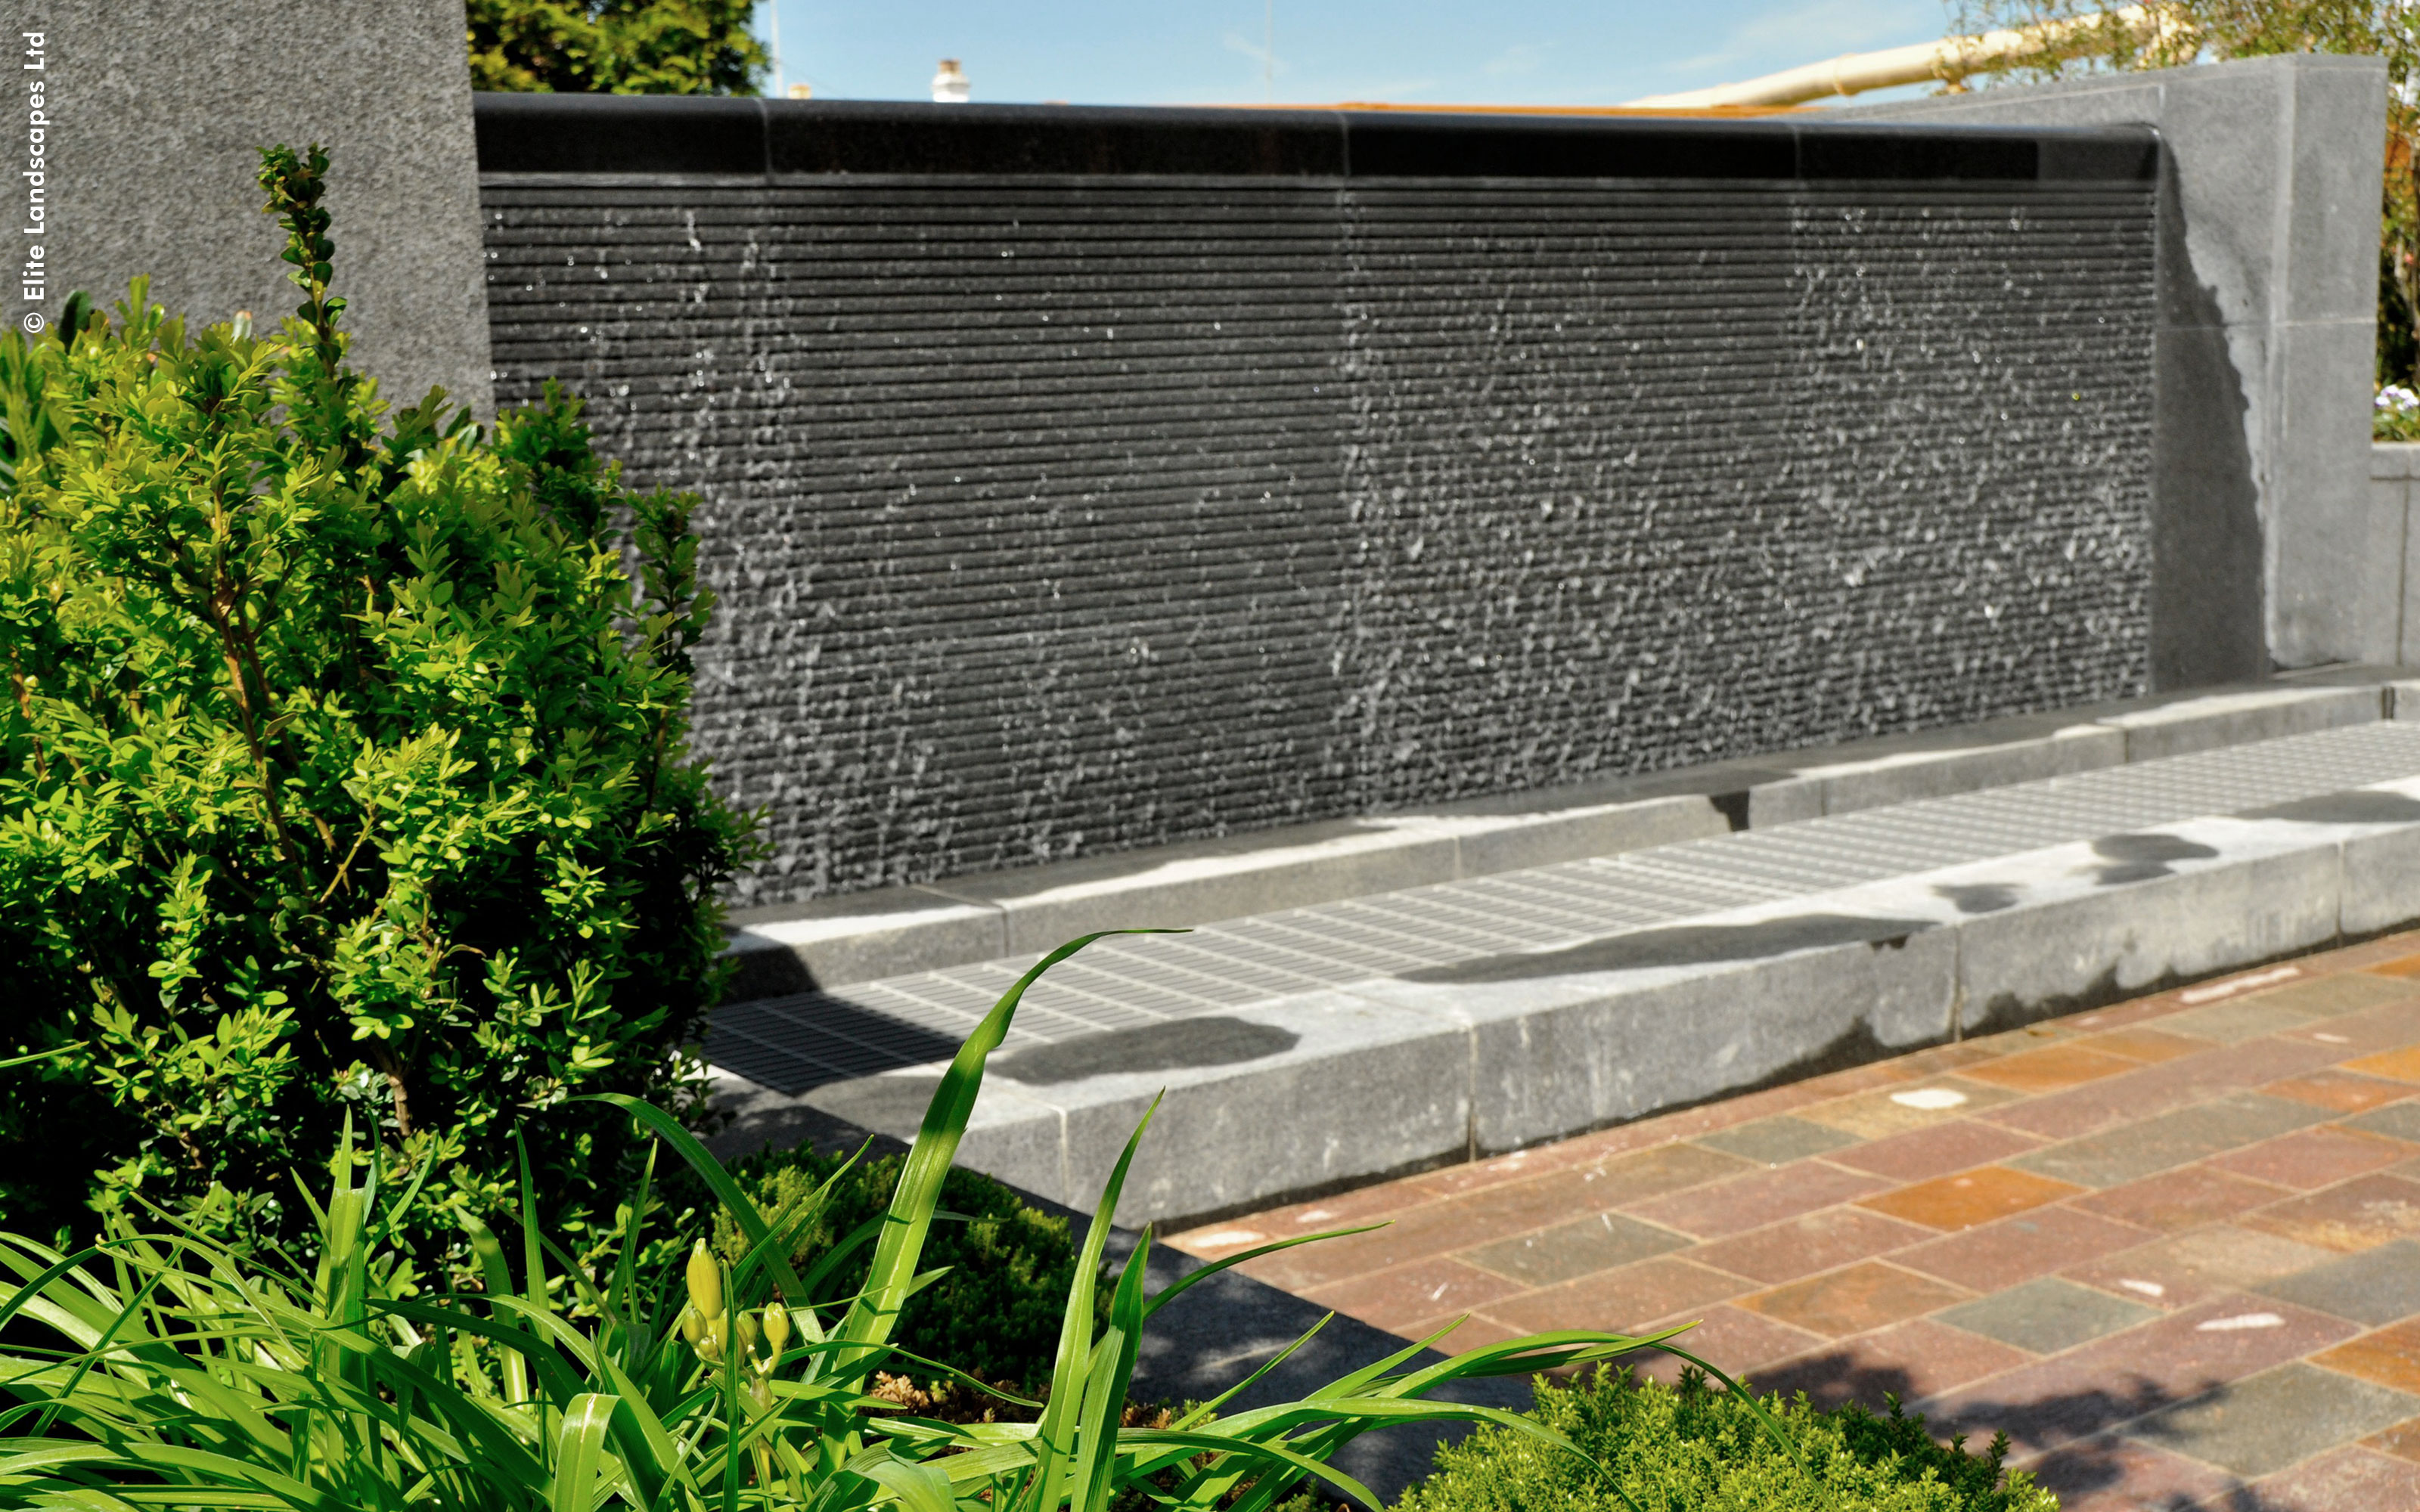 Roof terrace with a water feature